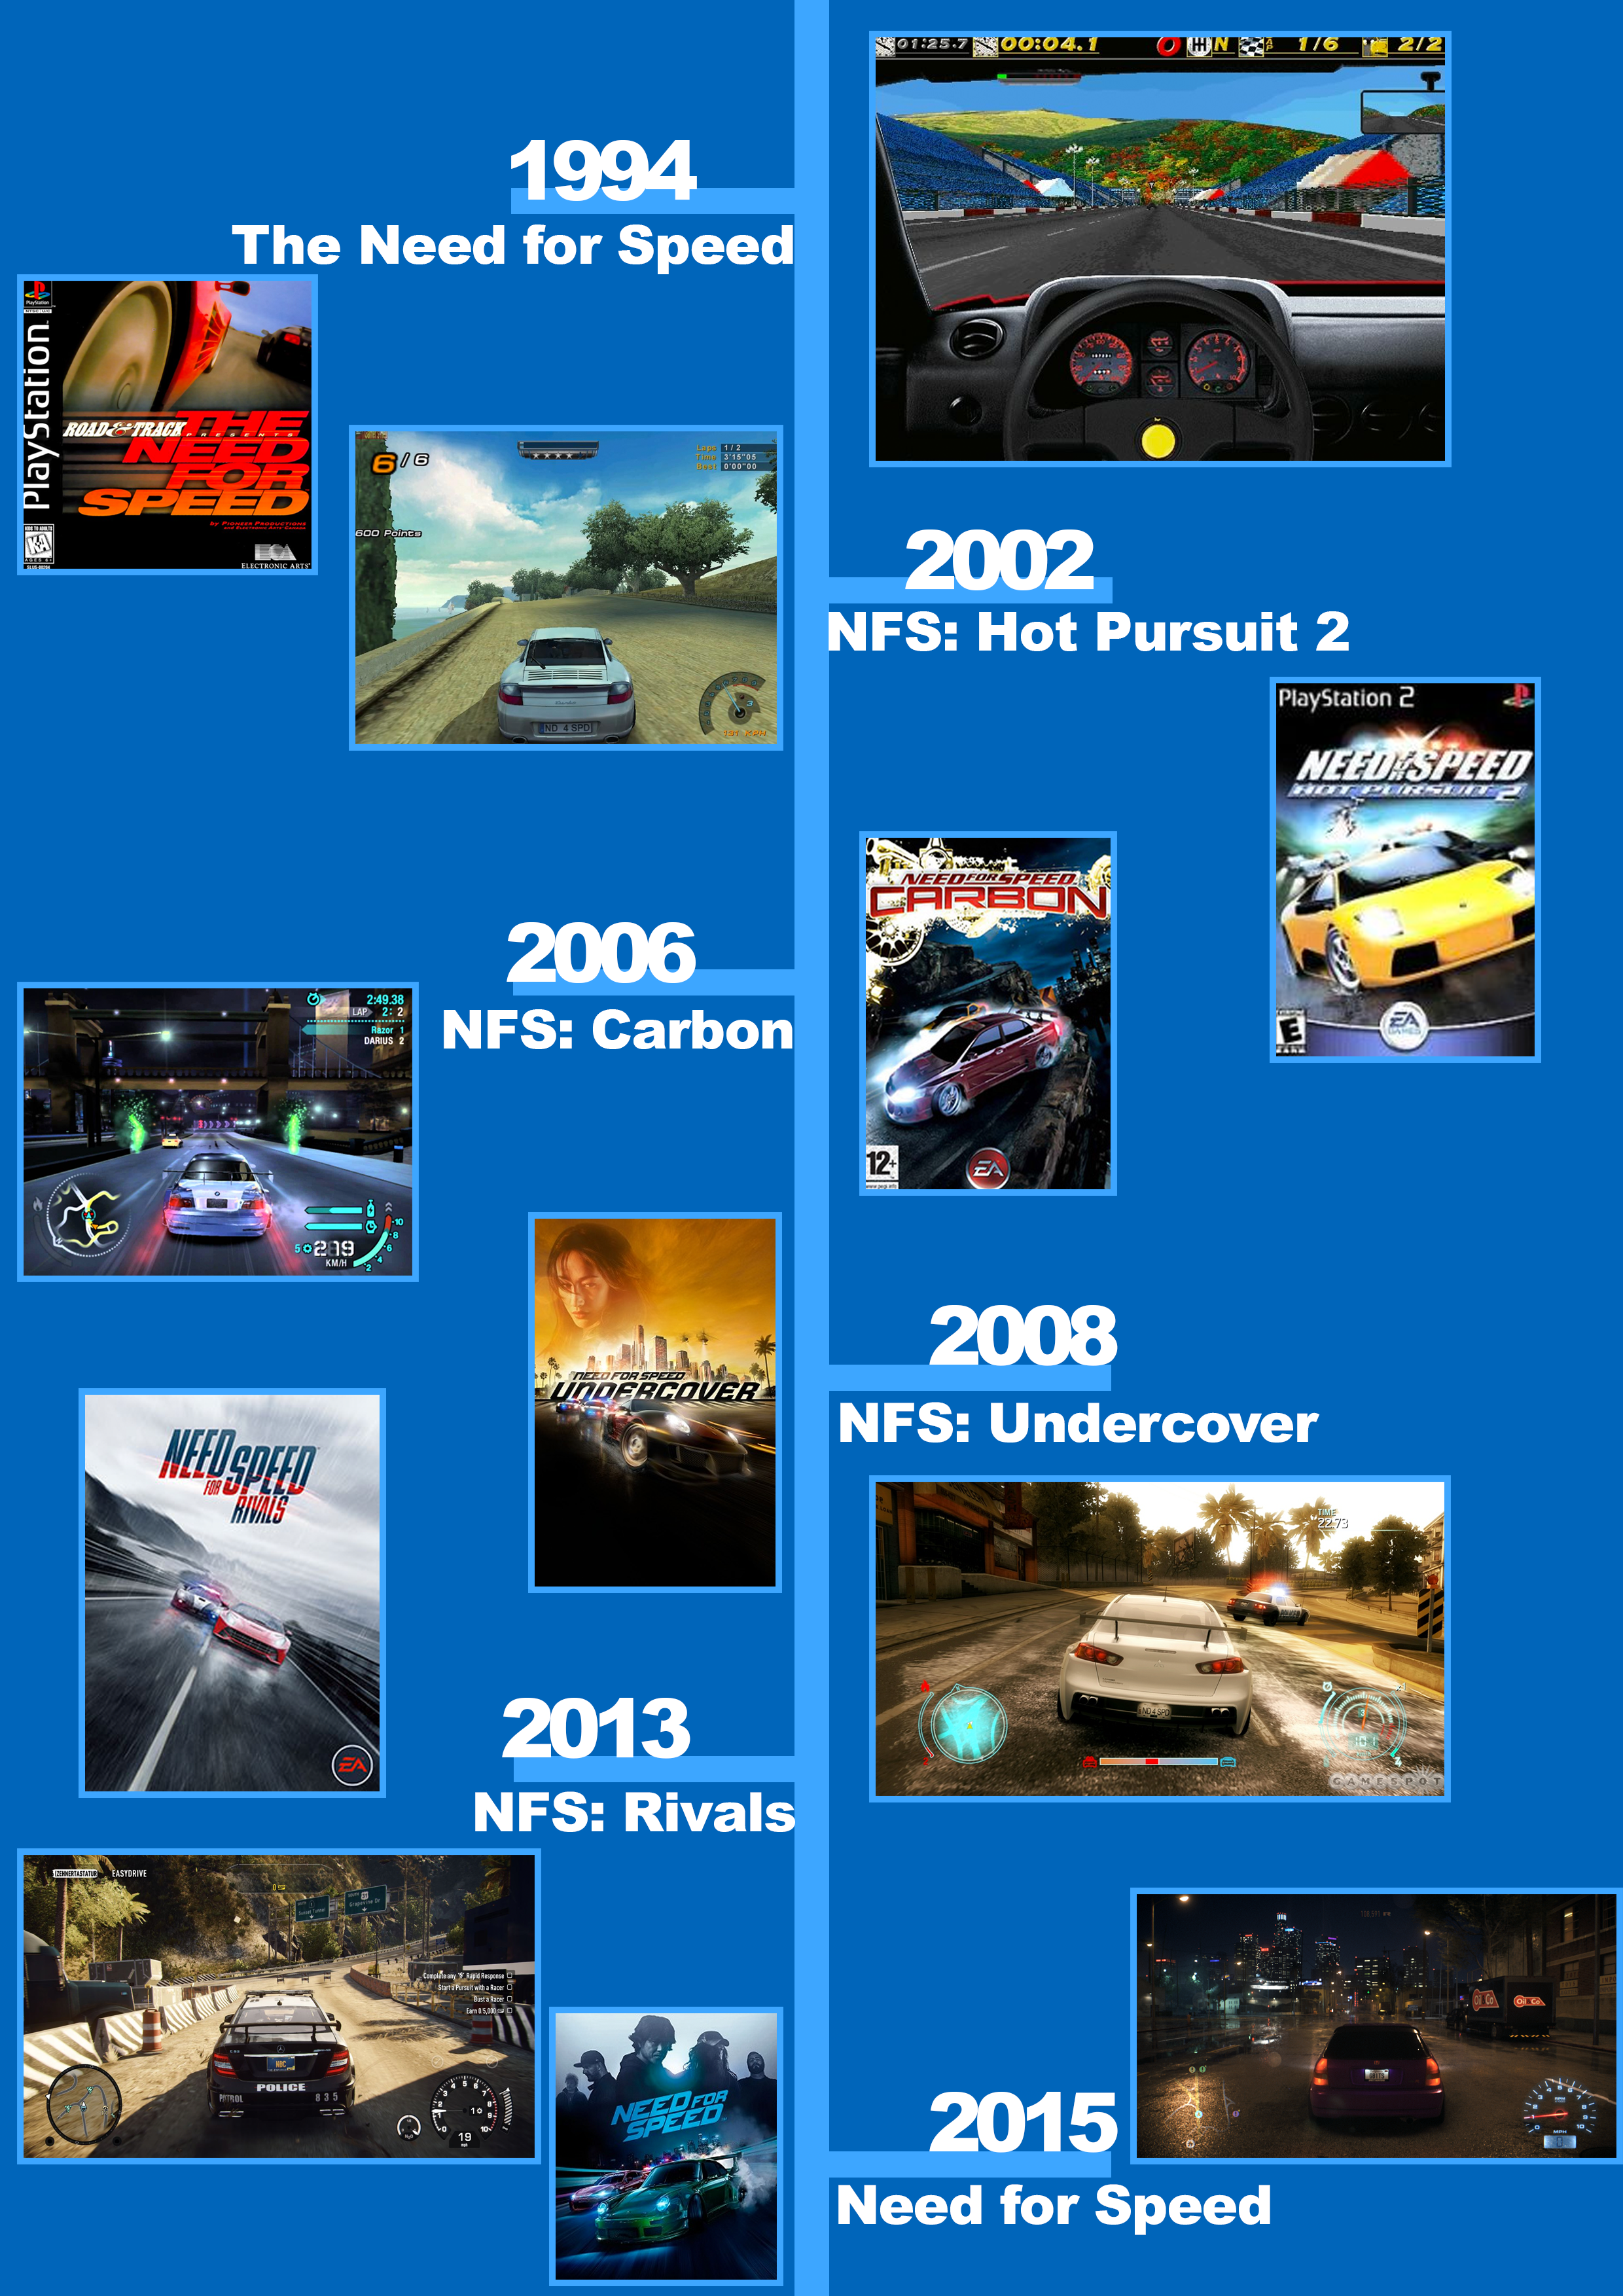 Racing Hud Assignment – Need For Speed games timeline. – My work!